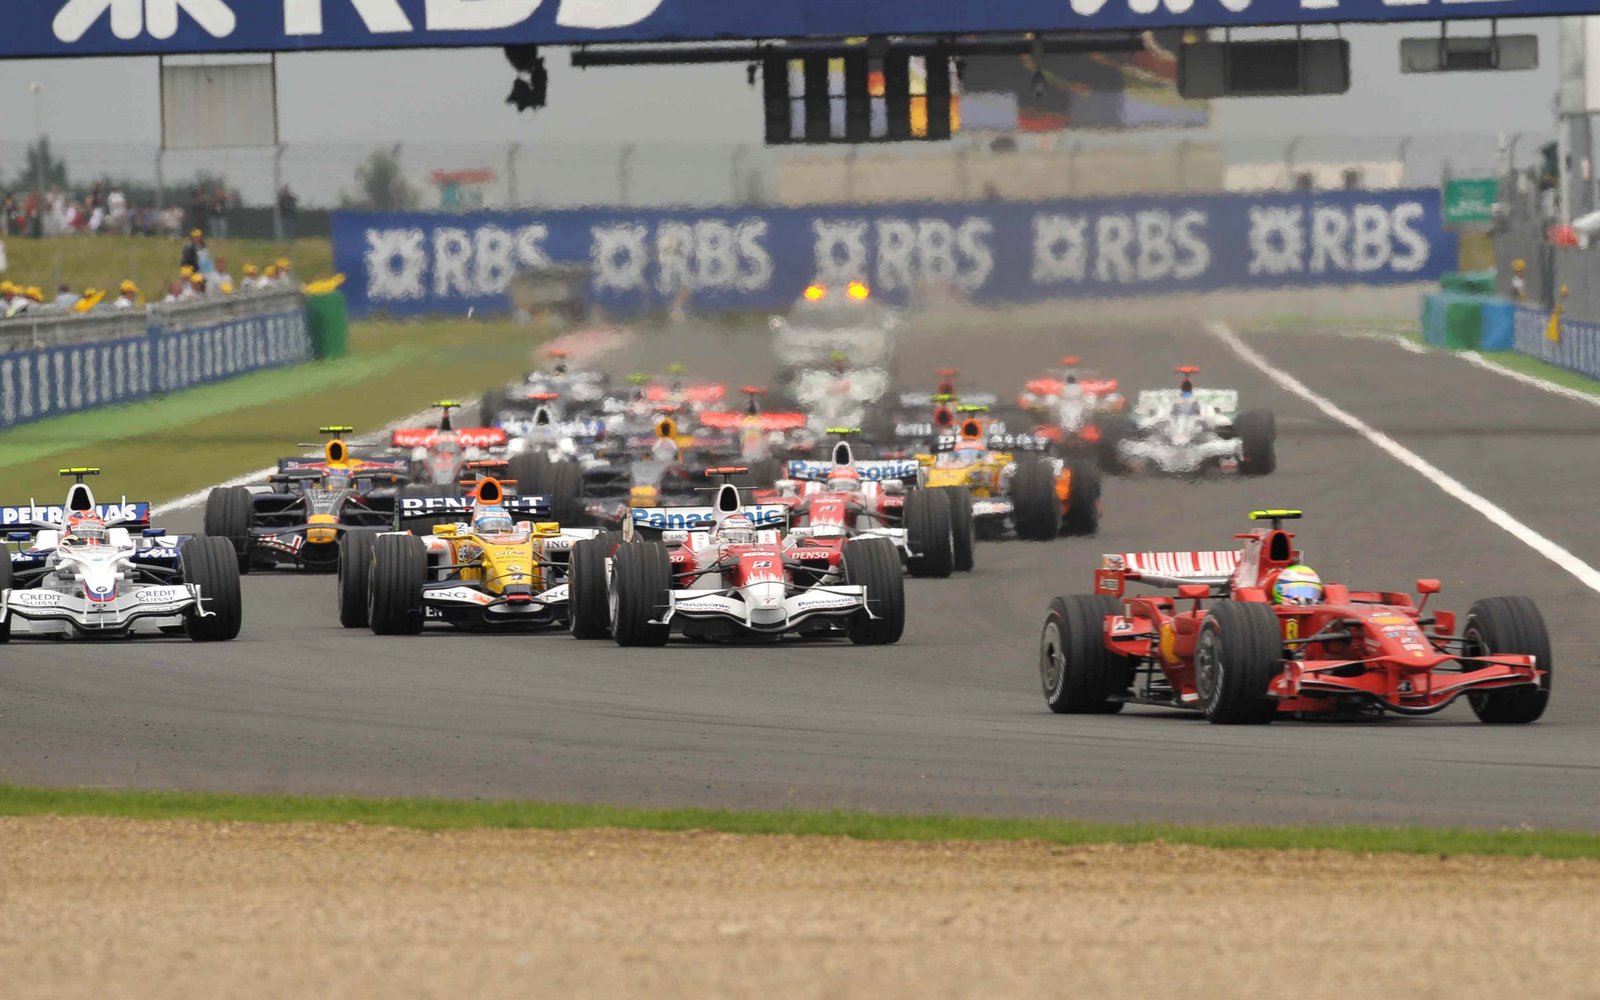 [Sunday+Race+in+France+Magny+Cours,+F1+2008+98.jpg]